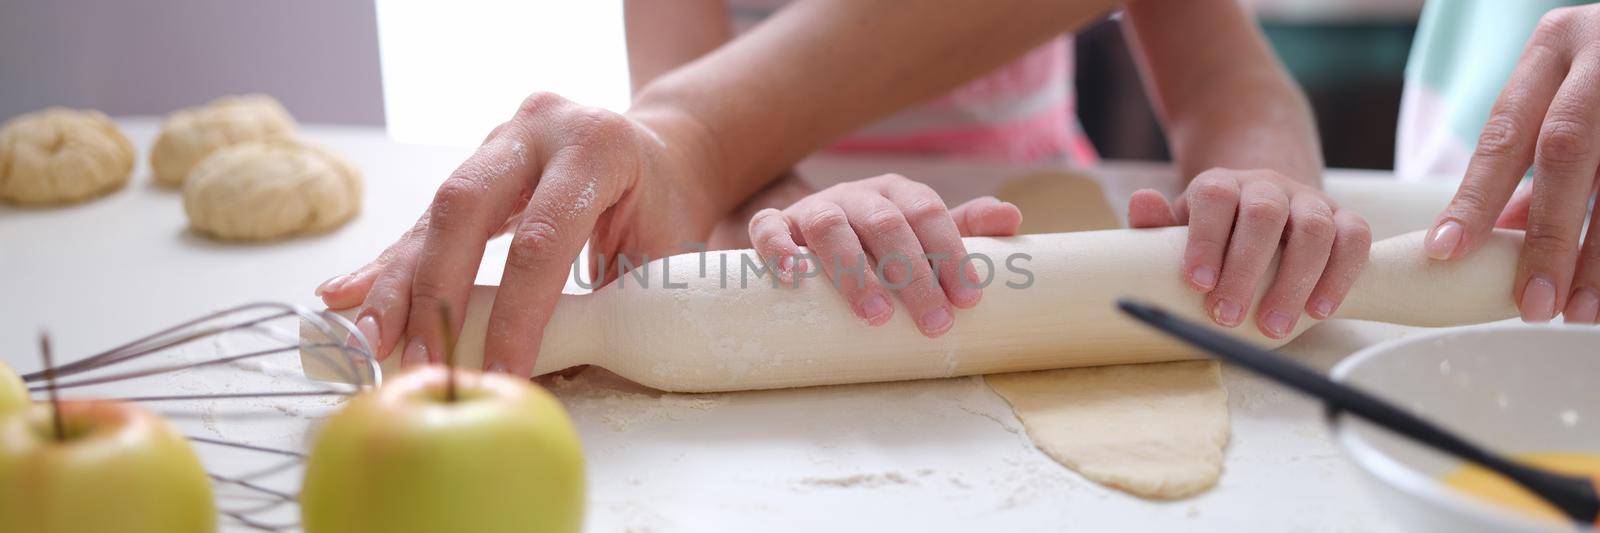 Adult and child roll out dough with rolling pin on table. Cooking classes and workshops for children concept